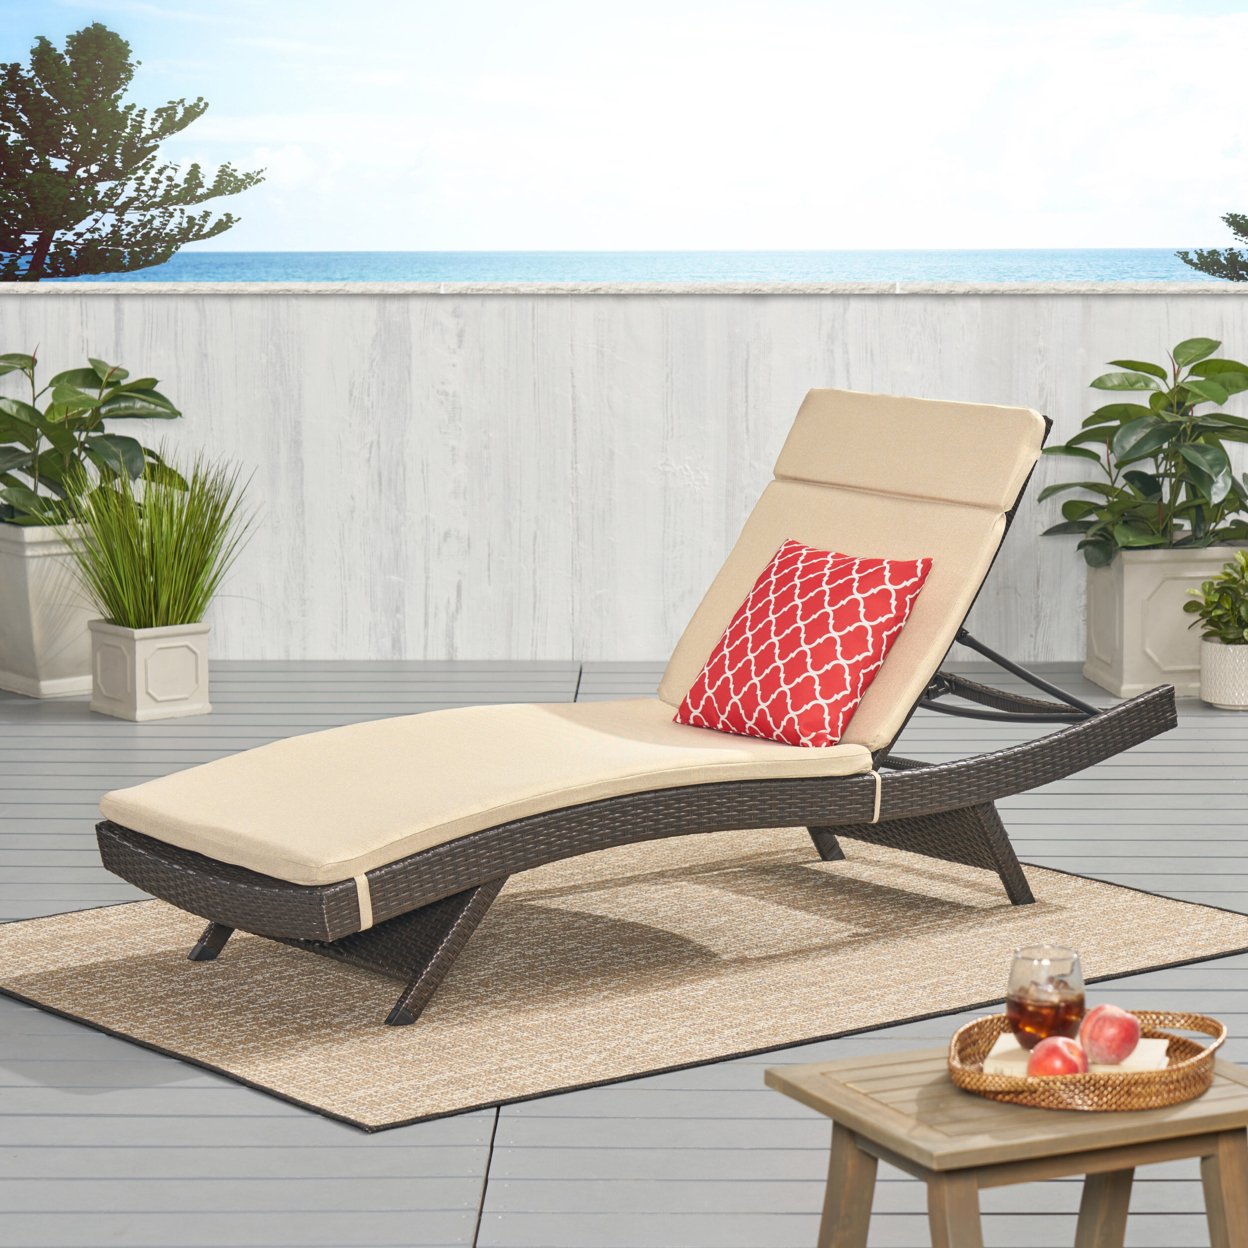 Lakeport Outdoor Adjustable Chaise Lounge Chair With Cushion - Textured Beige Cushion